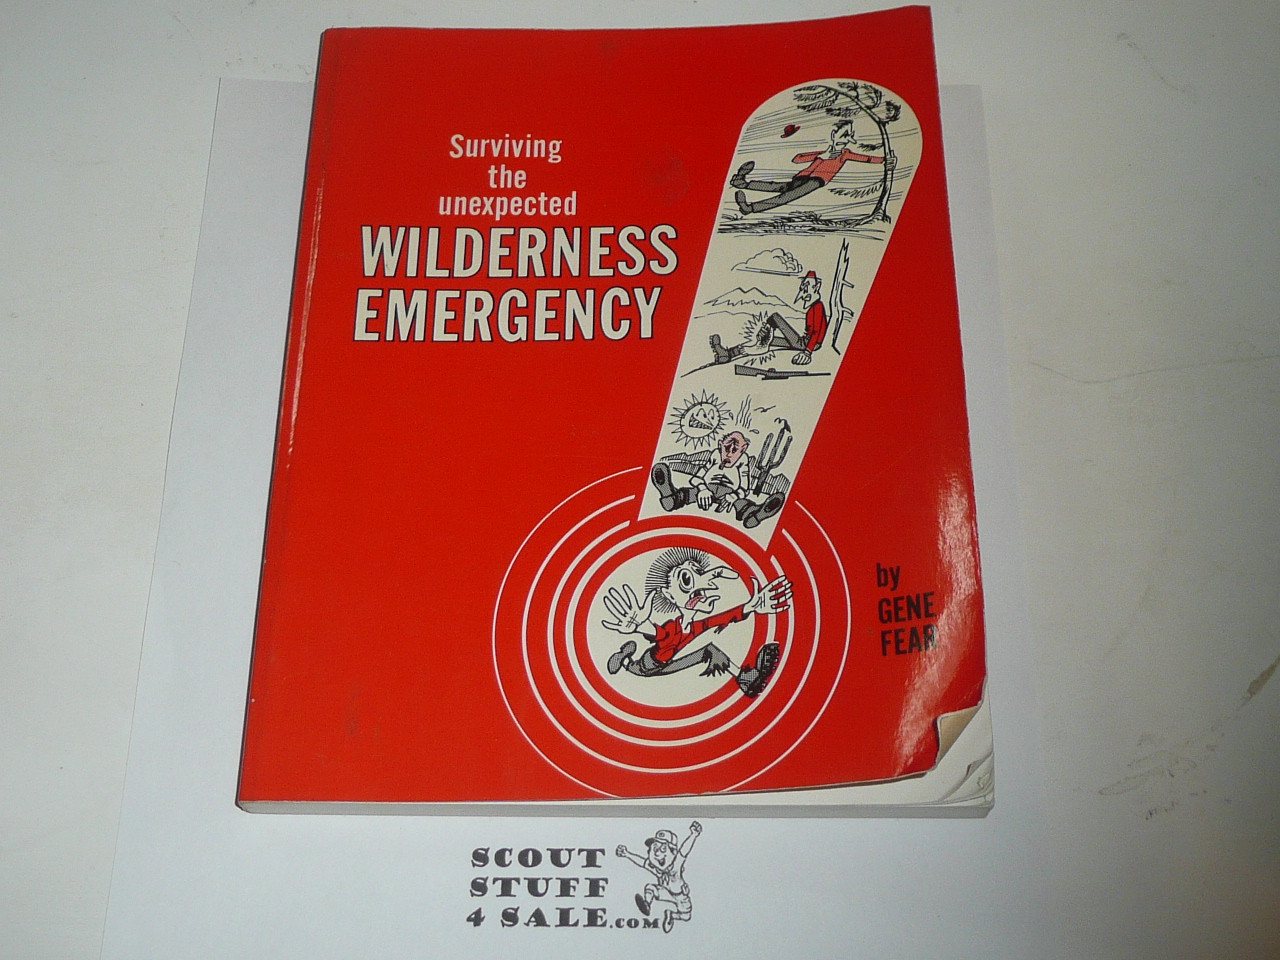 Surviving the Unexpected Wilderness Emergency, By Gene Fear, 1979